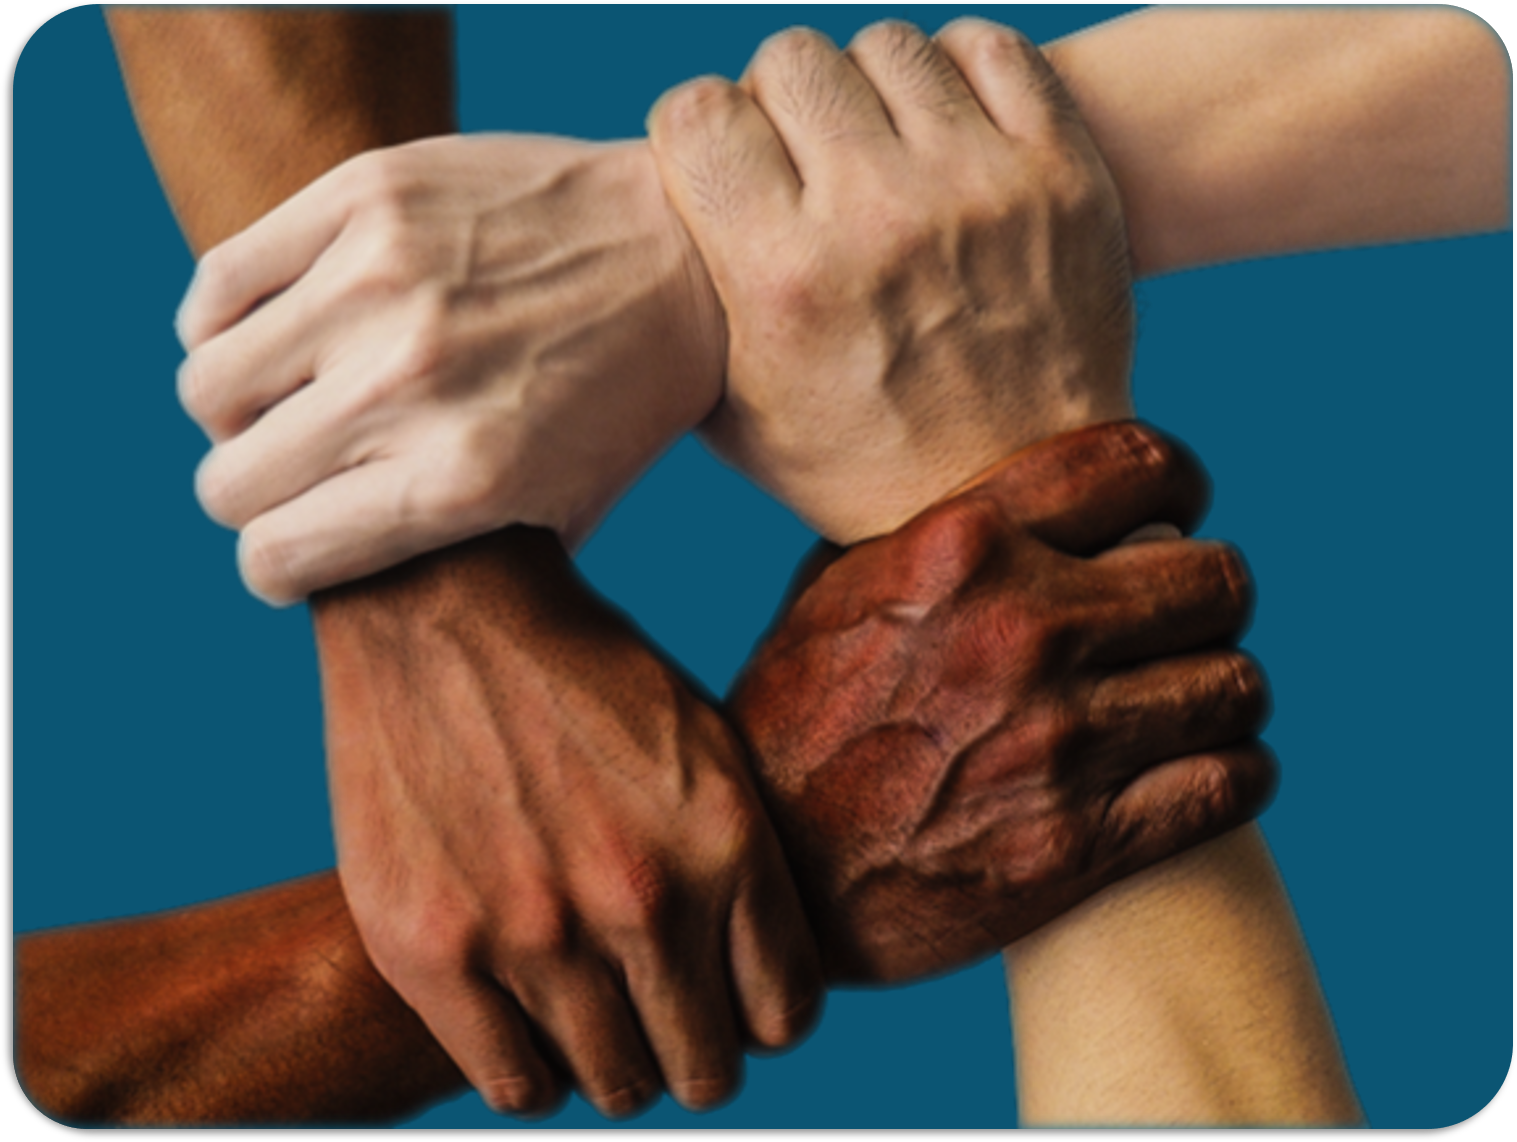 Interlocking hands from different cultural backgrounds.